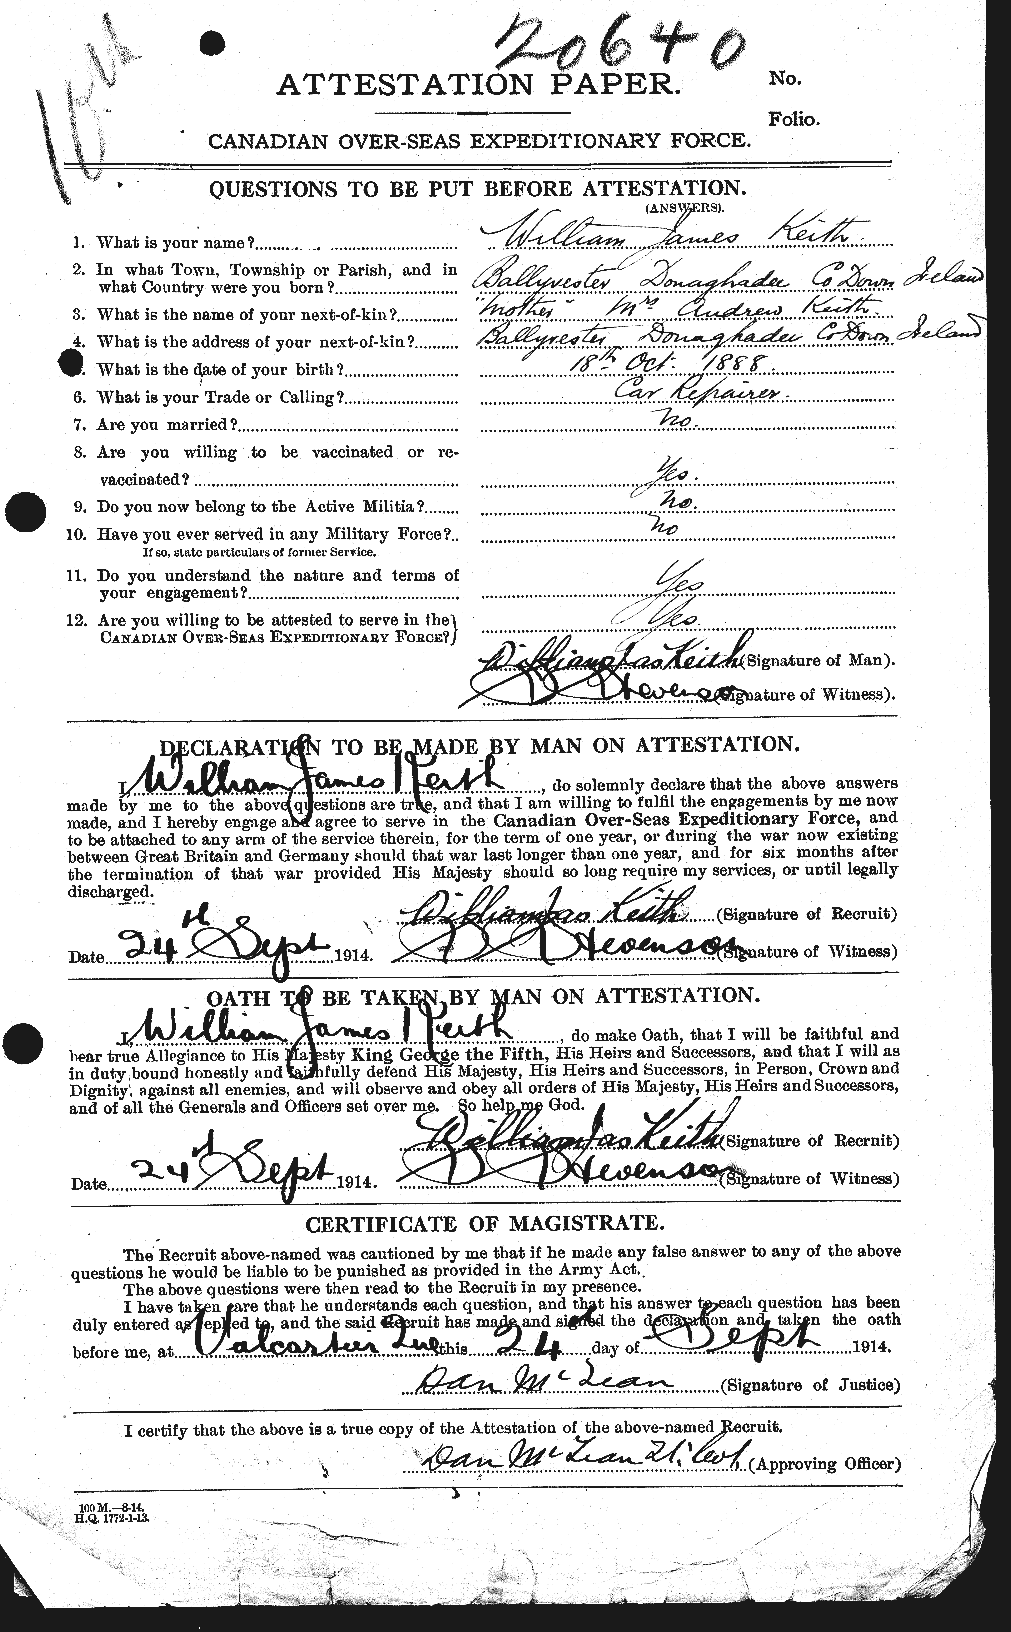 Personnel Records of the First World War - CEF 432519a